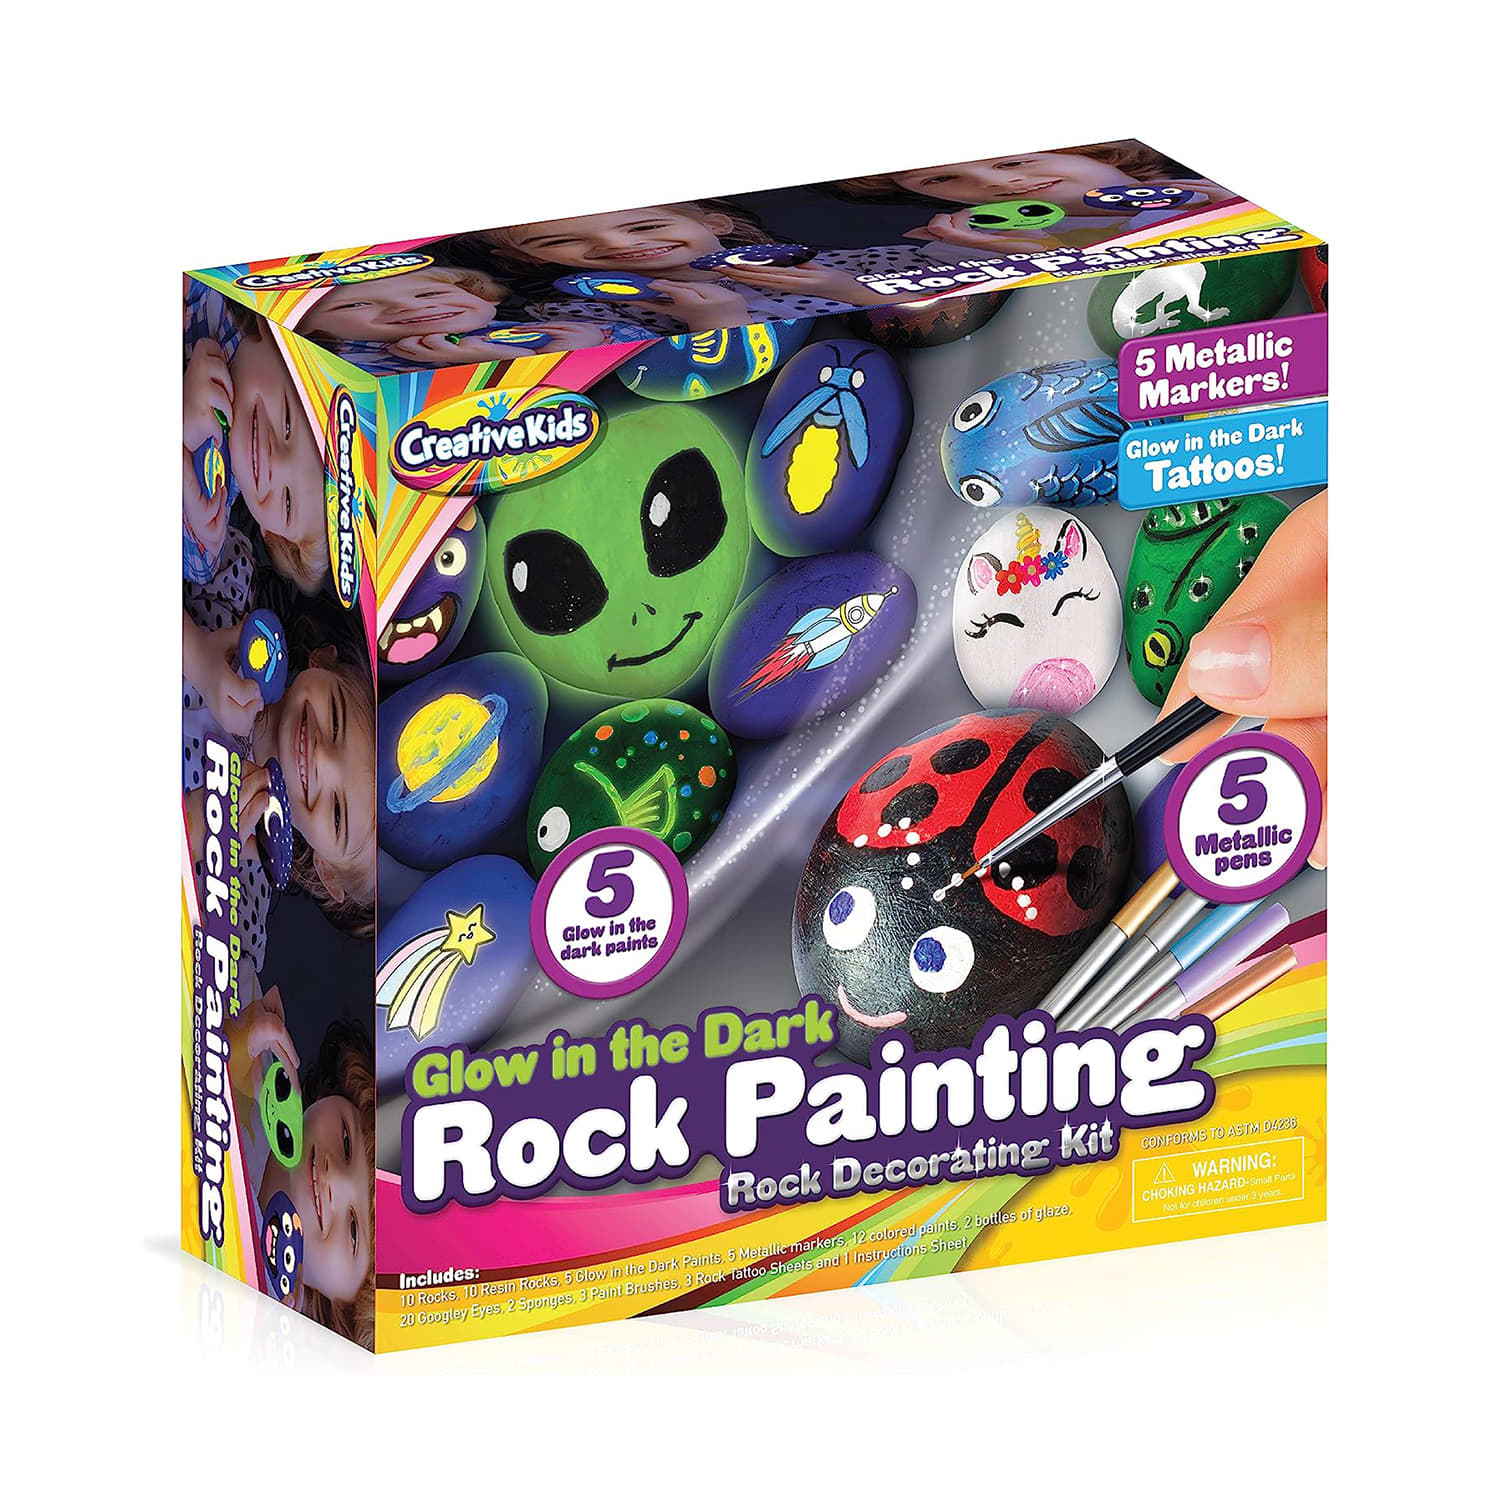 Creativity for kids glow in the dark rock painting kit, 1 ea